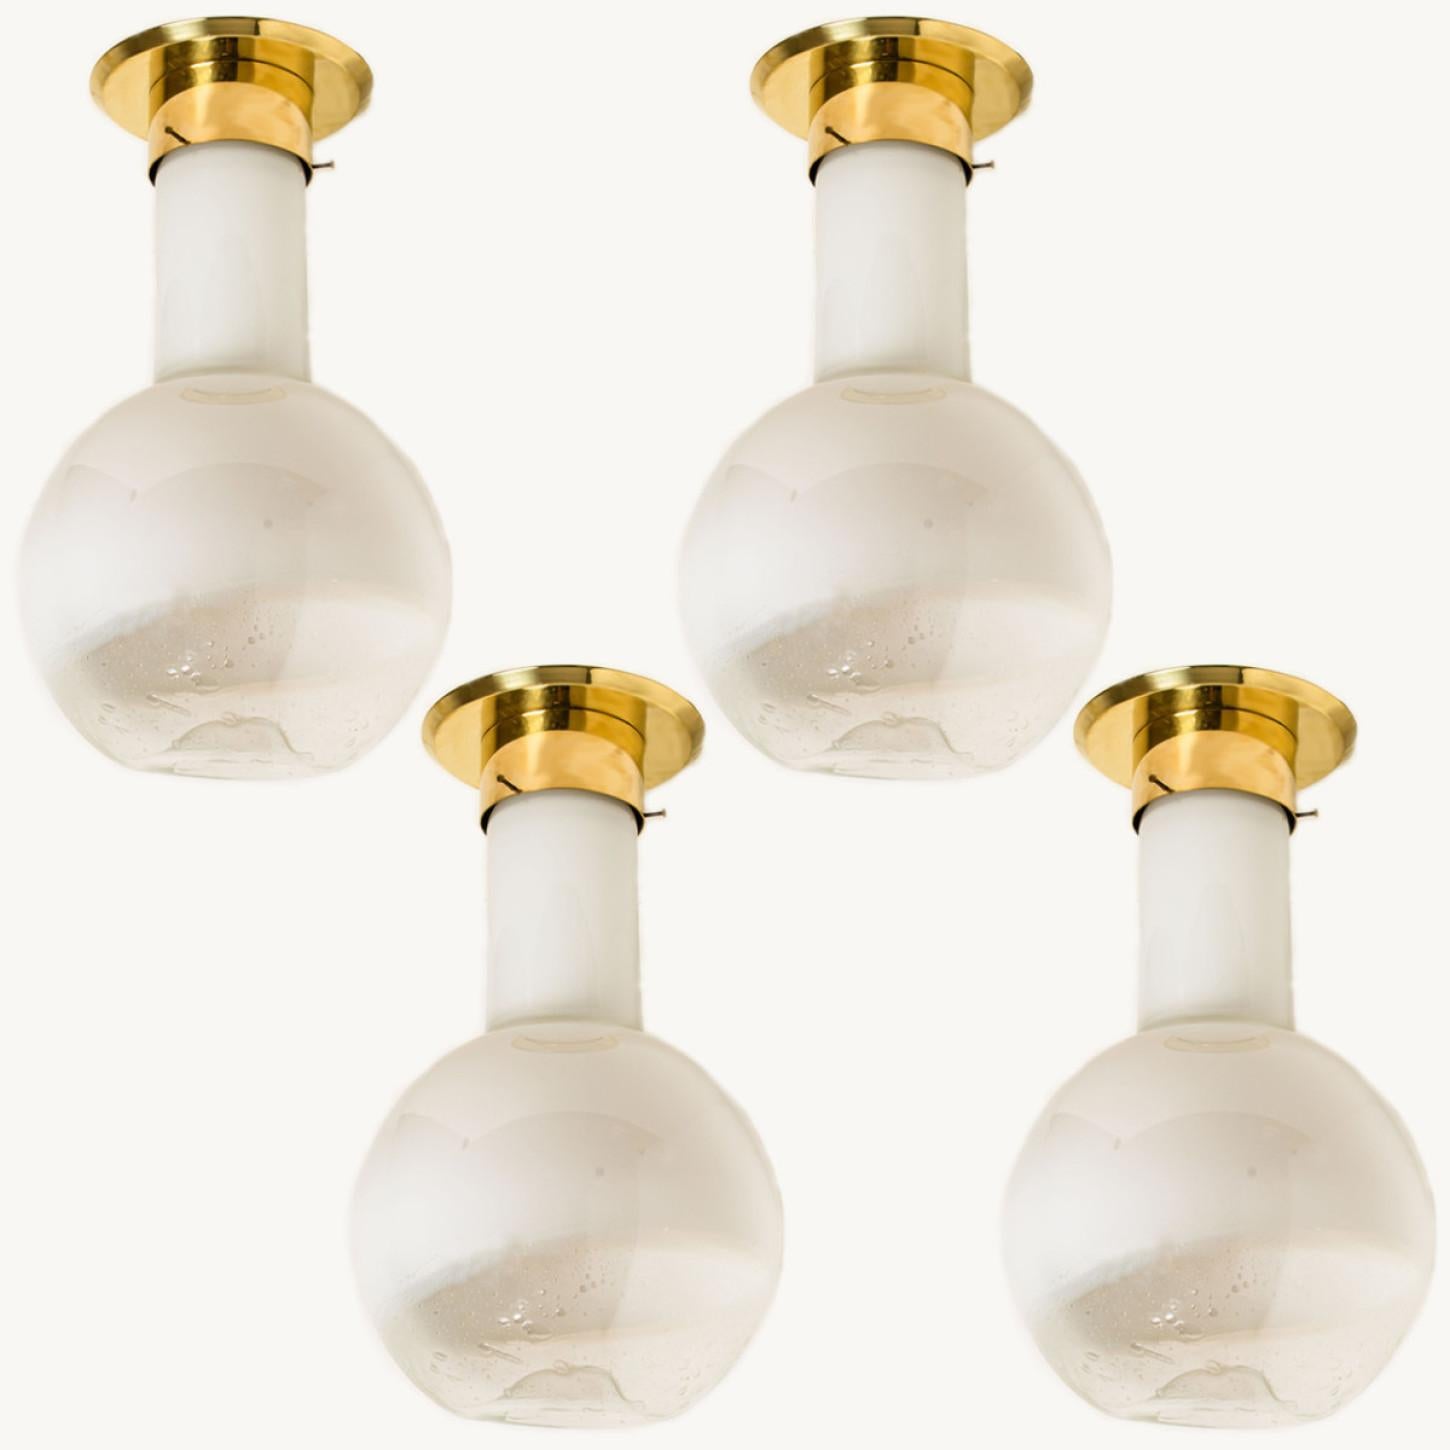 These beautiful large glass ceiling lamps with brass details were manufactured by Harrachov in the Czech Republic around 1970.

The lamps have a beautiful shape, half cylinder and half round. This creates an elegant appearance, that is beautifully